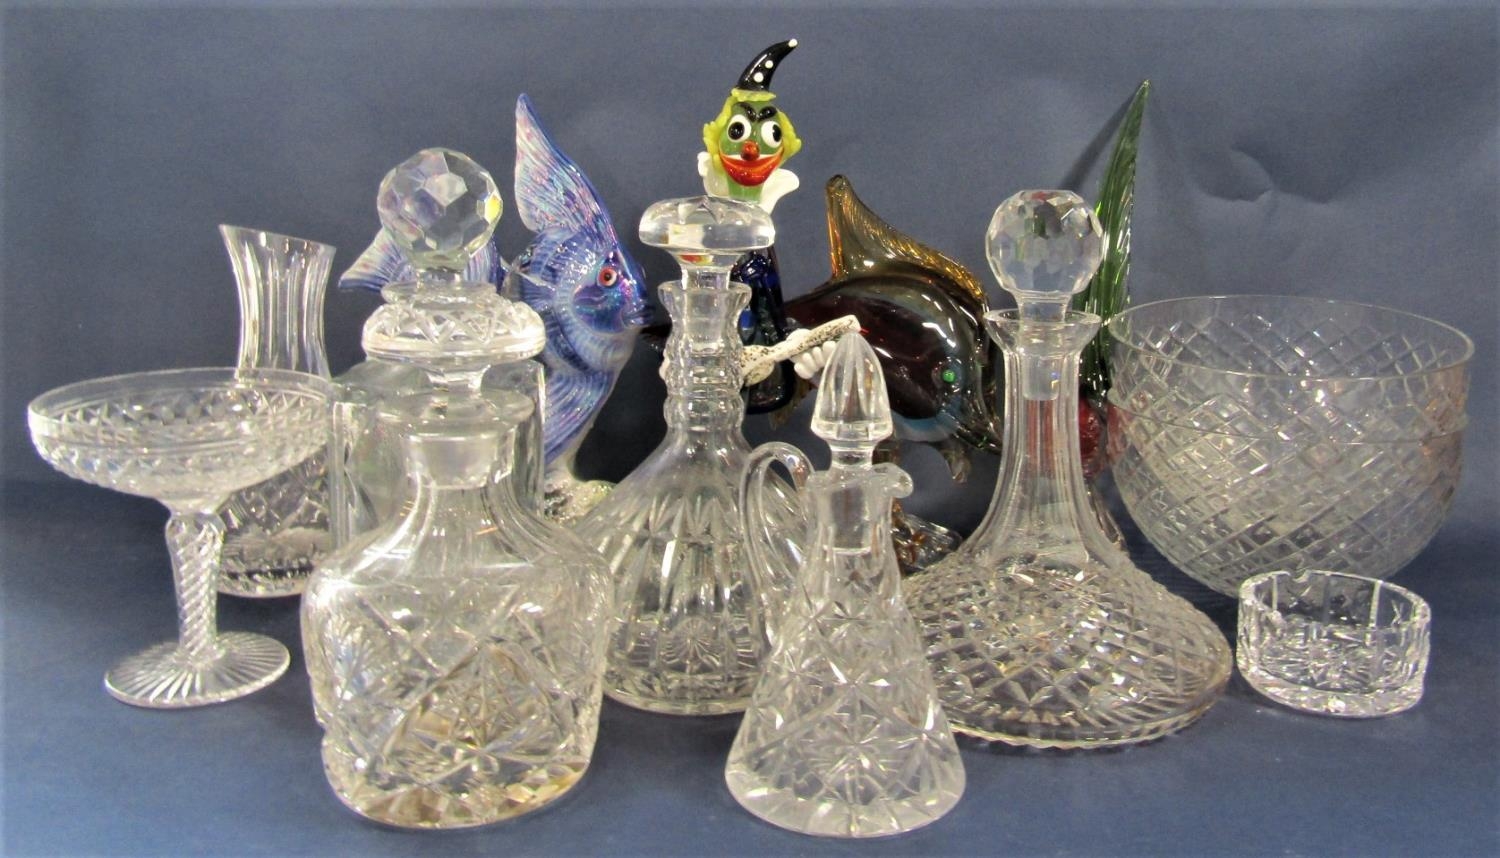 A collection of glassware to include decanters, jugs, bowls, a Murano glass clown, fish and